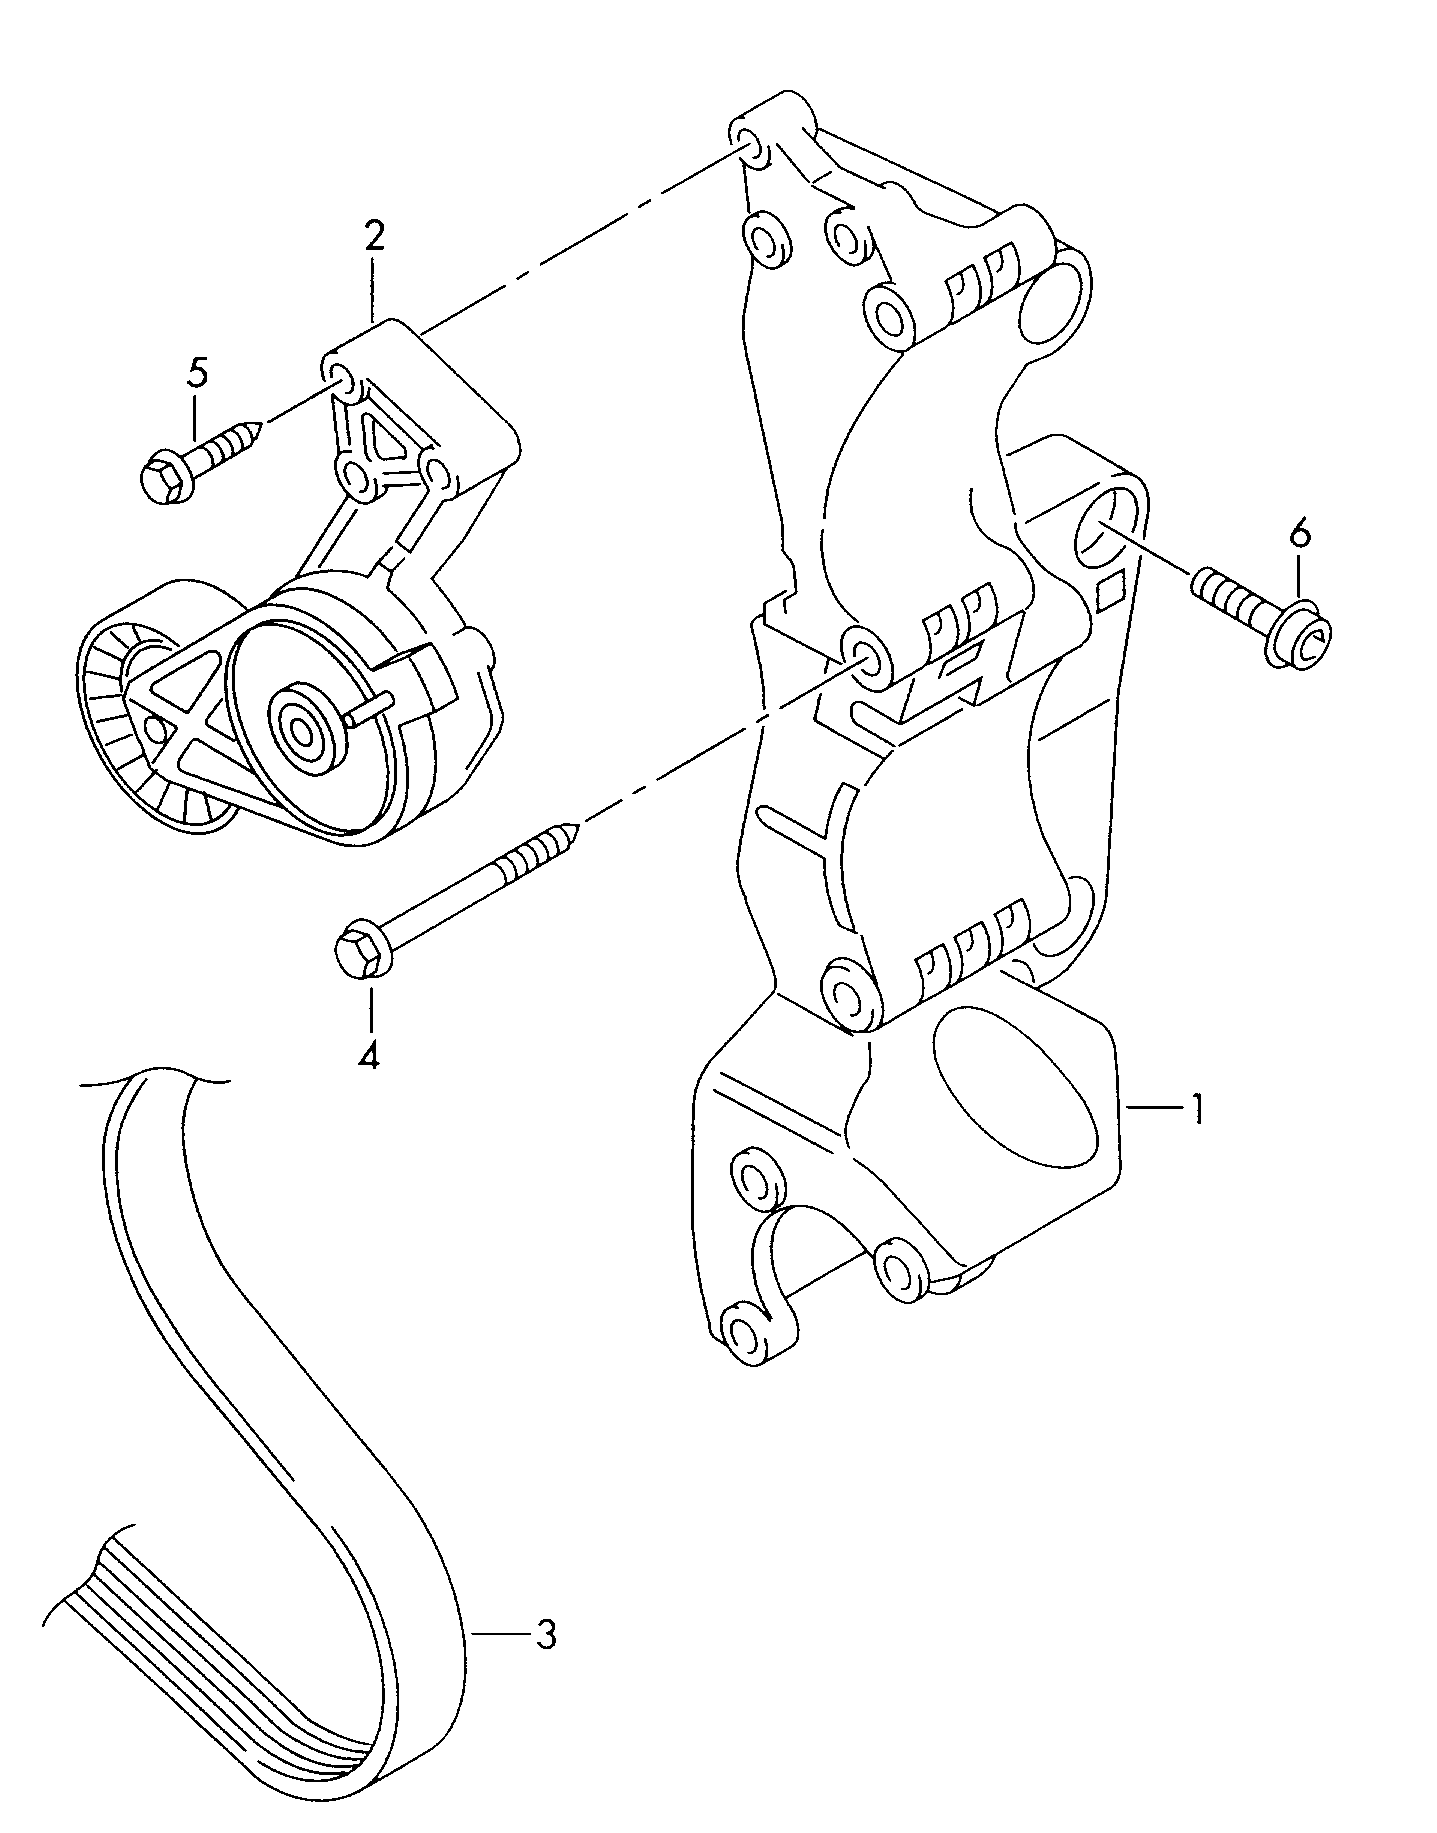 connecting and mounting parts<br>for alternatorPoly-V-belt 1.9ltr. - Octavia - oct